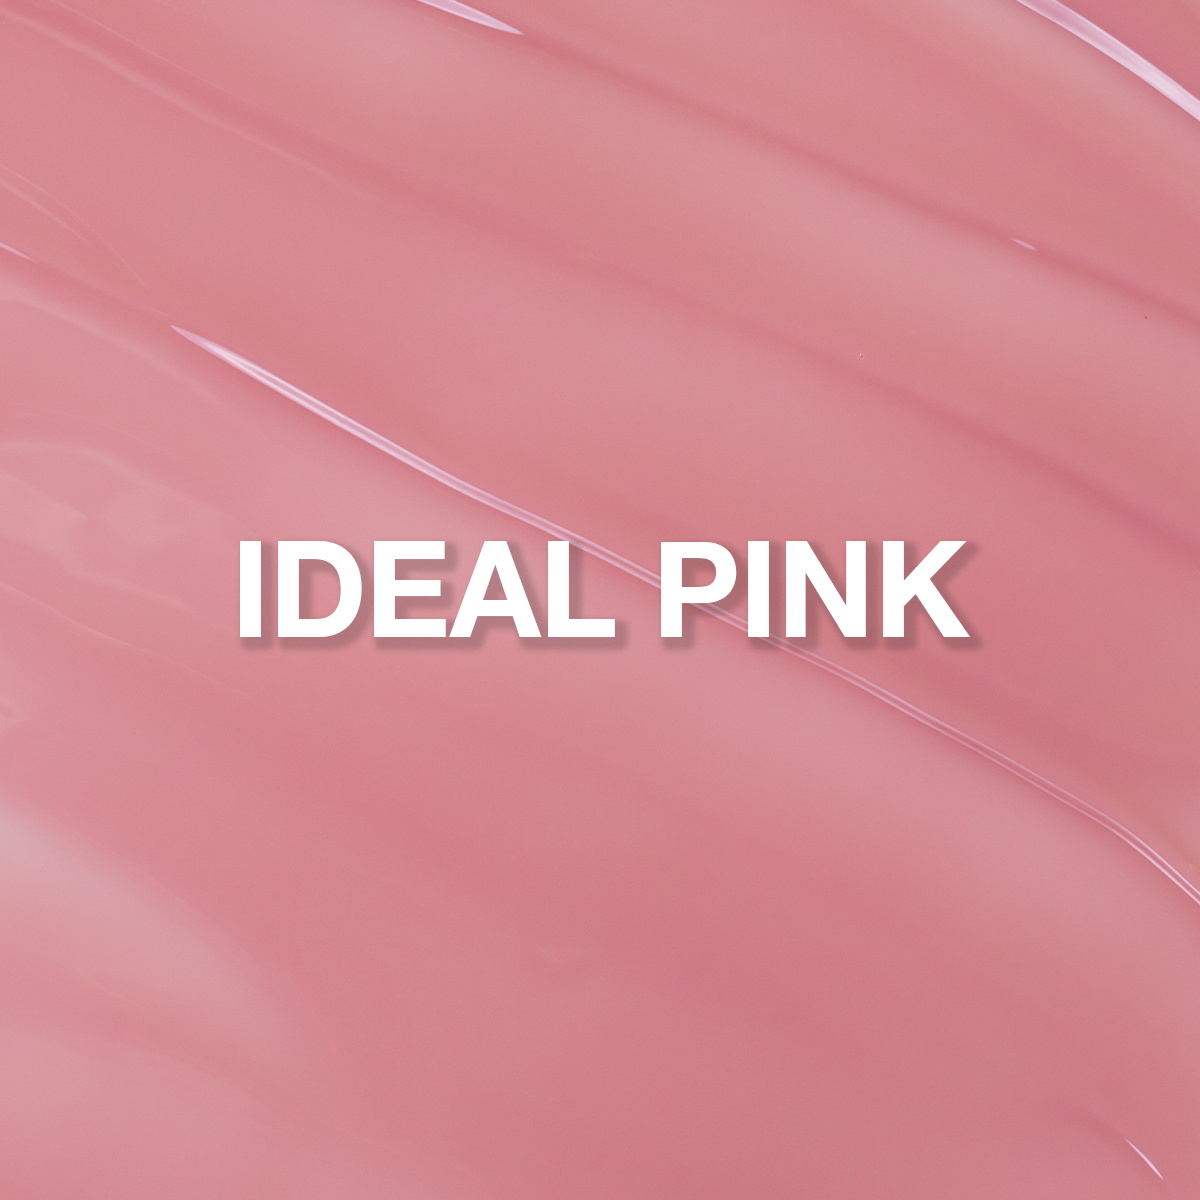 Ideal Pink 1-Step Lexy Line Refill Bundle